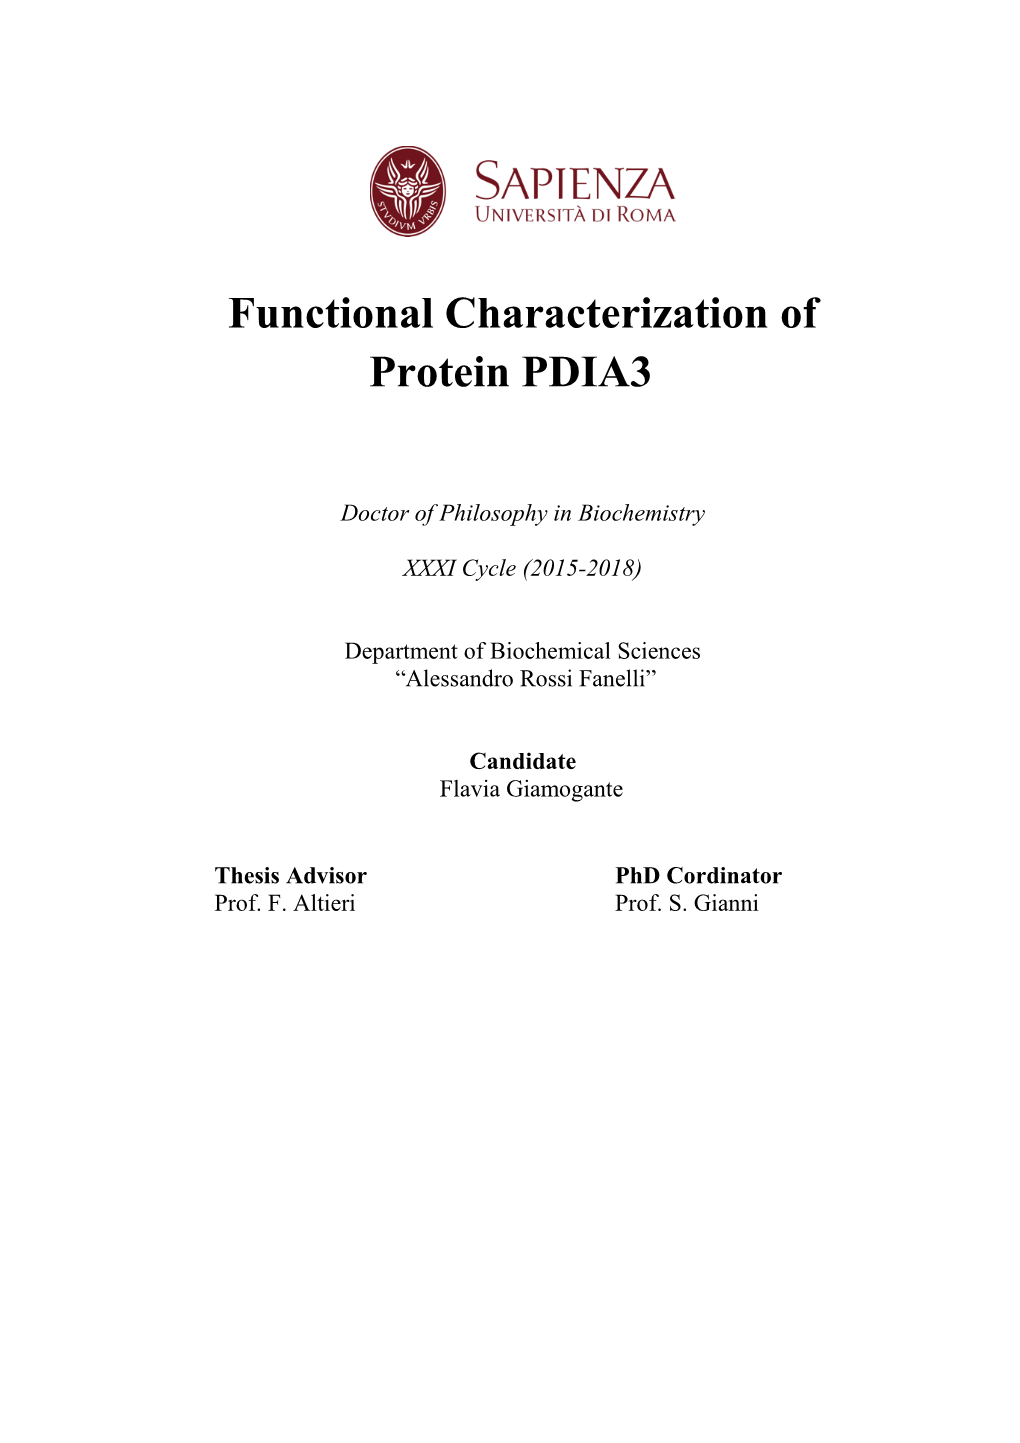 Functional Characterization of Protein PDIA3